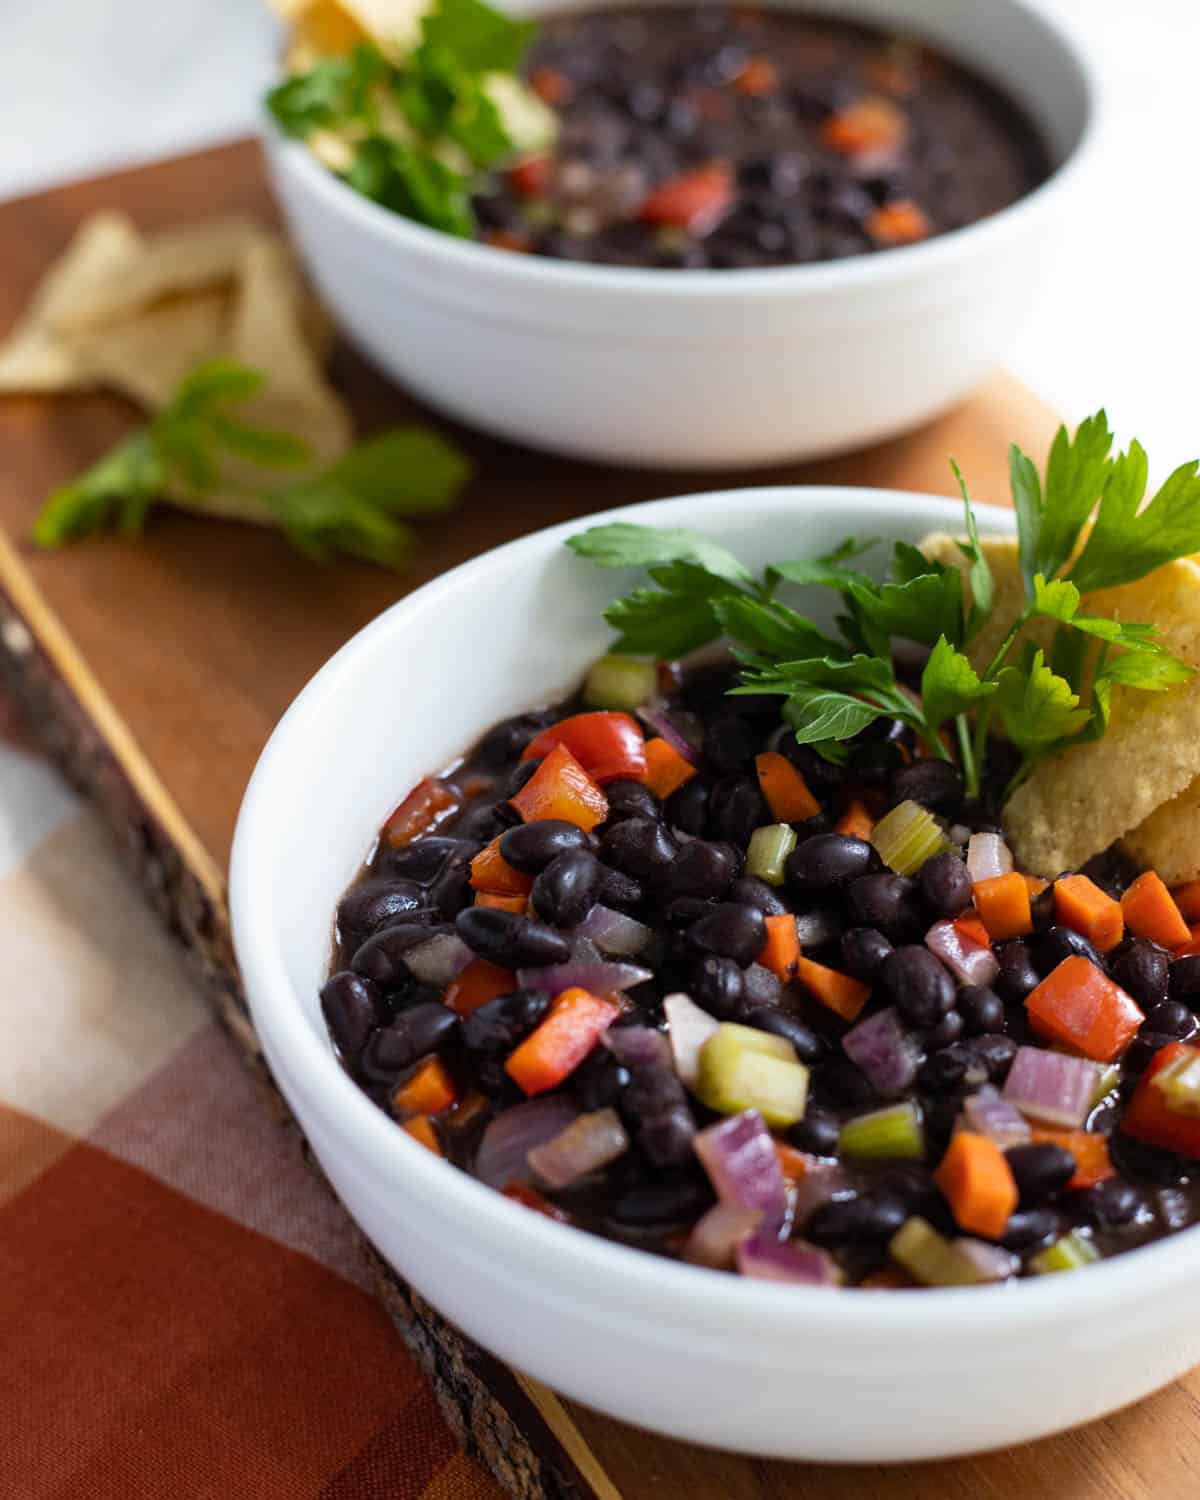 Black bean soup with red peppers and vegetables in white bowl.
